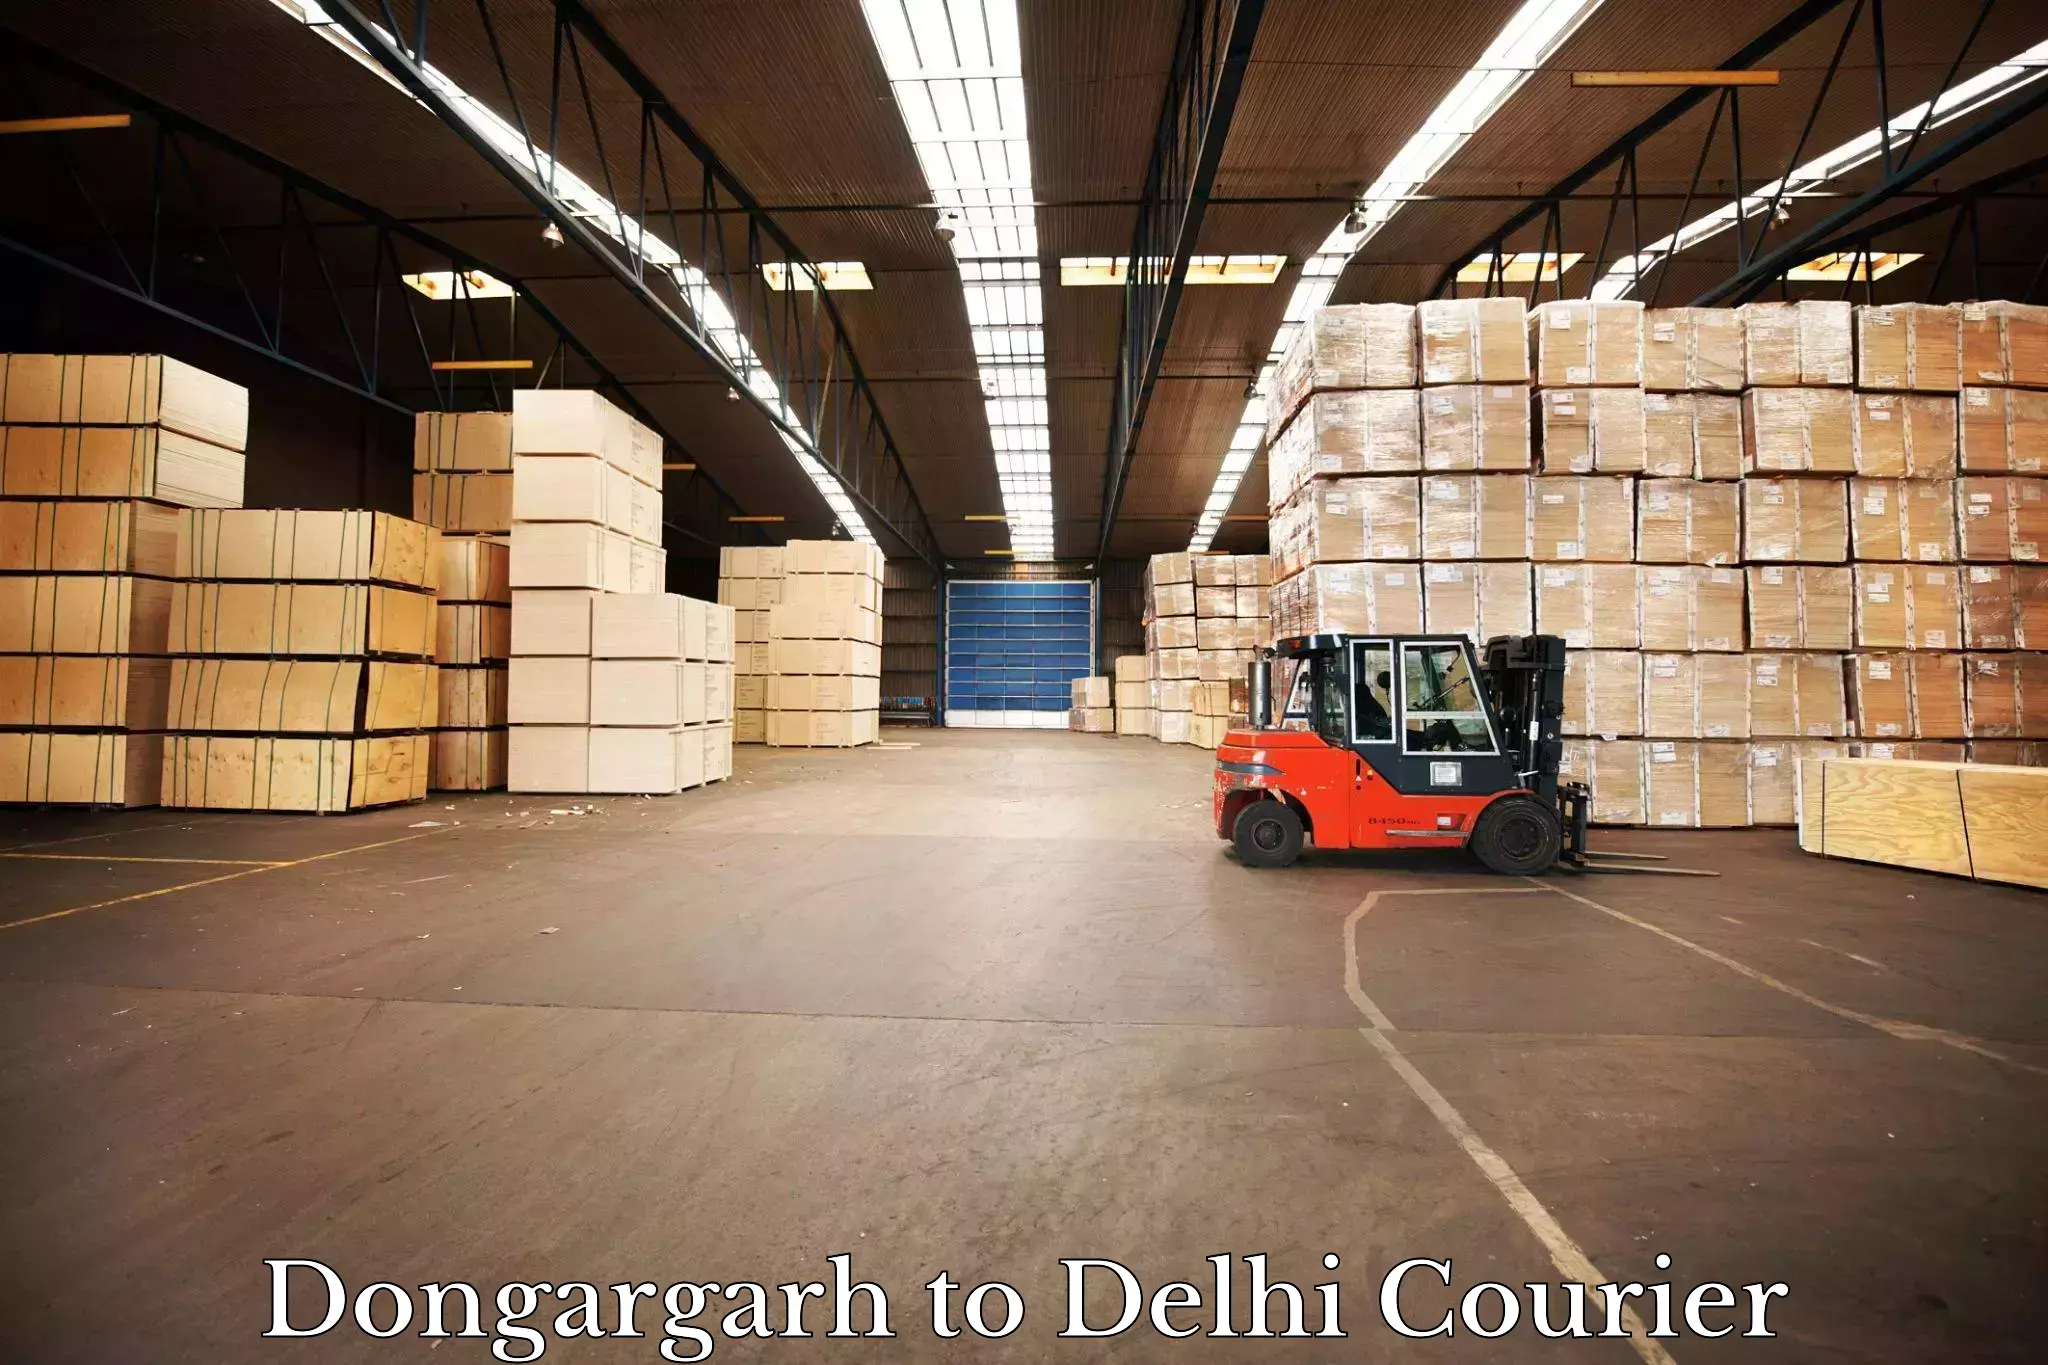 24/7 courier service Dongargarh to University of Delhi